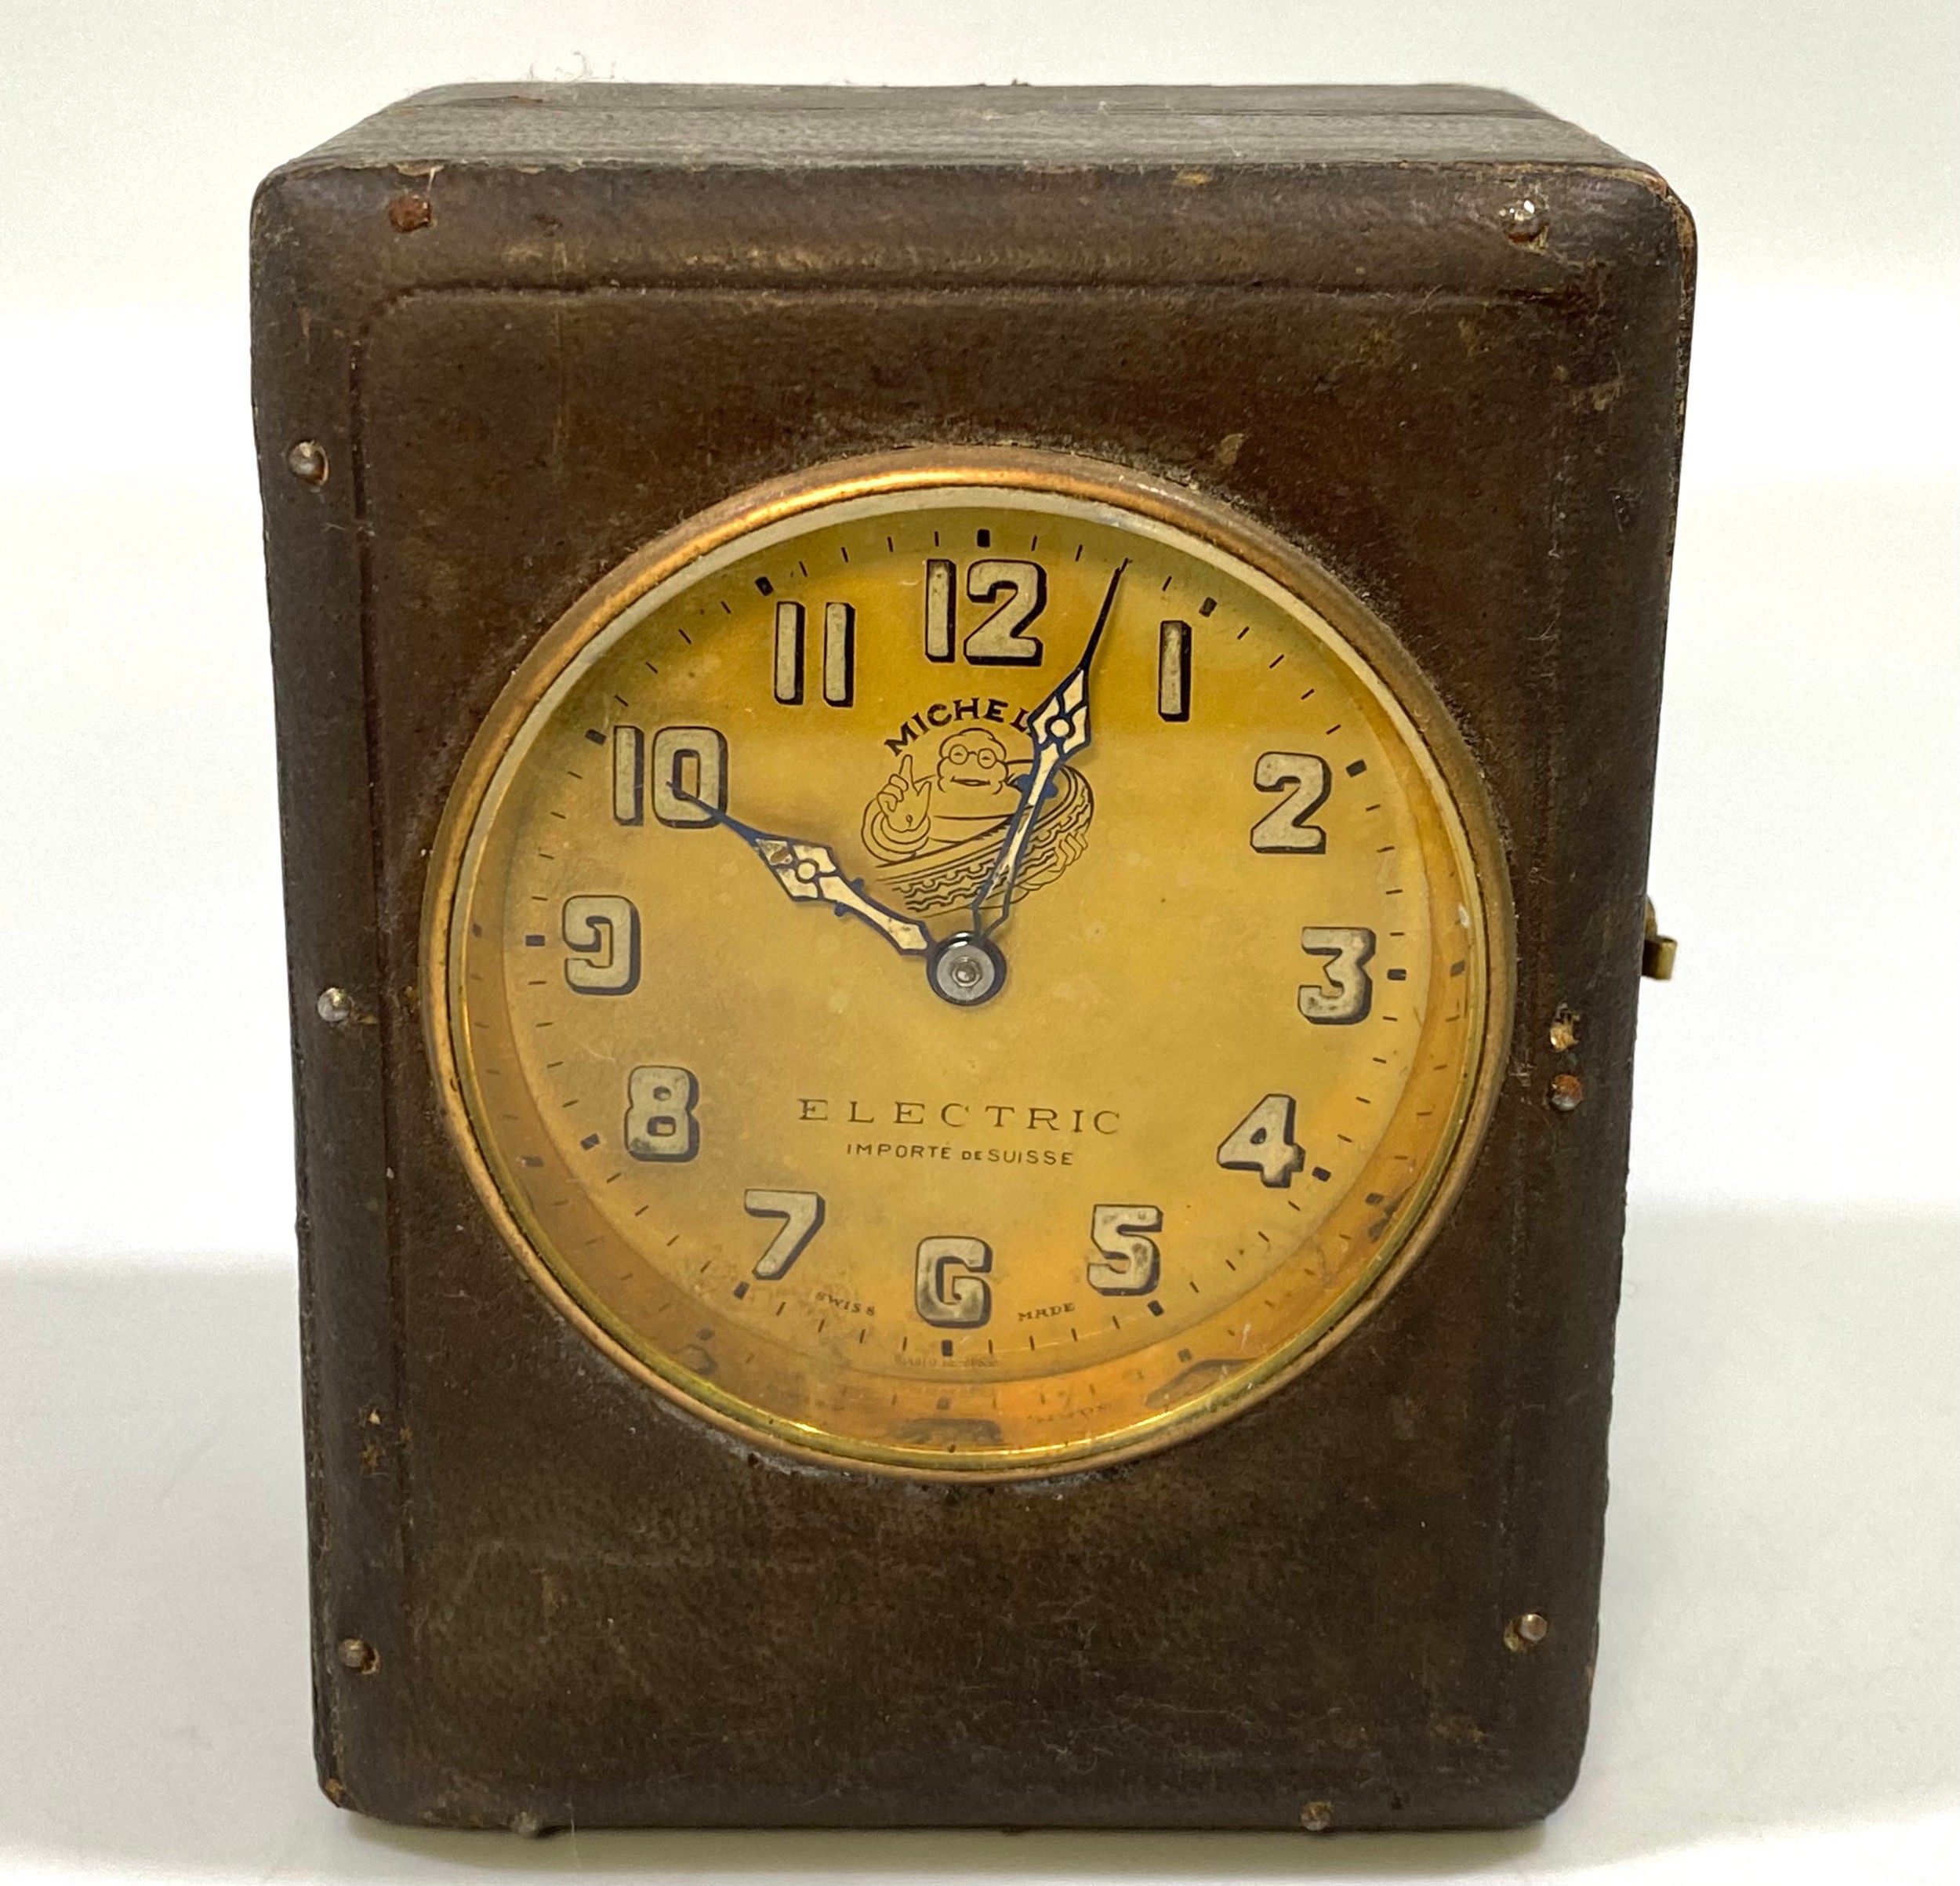 A 1920’s Michelin Electric travel clock, the brass dial with Arabic numerals denoting hours,